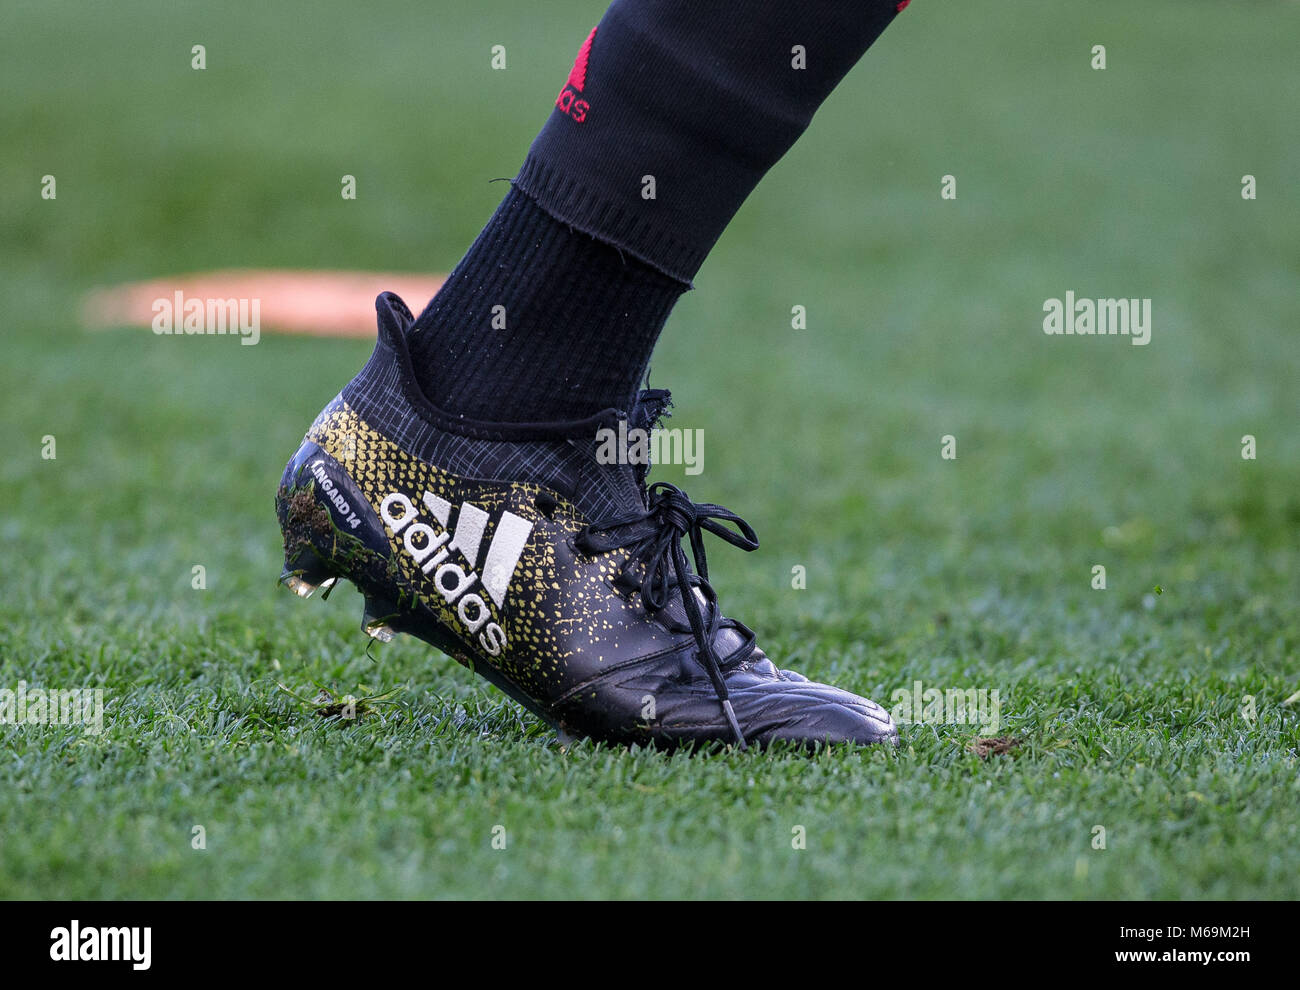 Jesse Lingard of Manchester United sock & adidas boot during the EPL Stock  Photo - Alamy